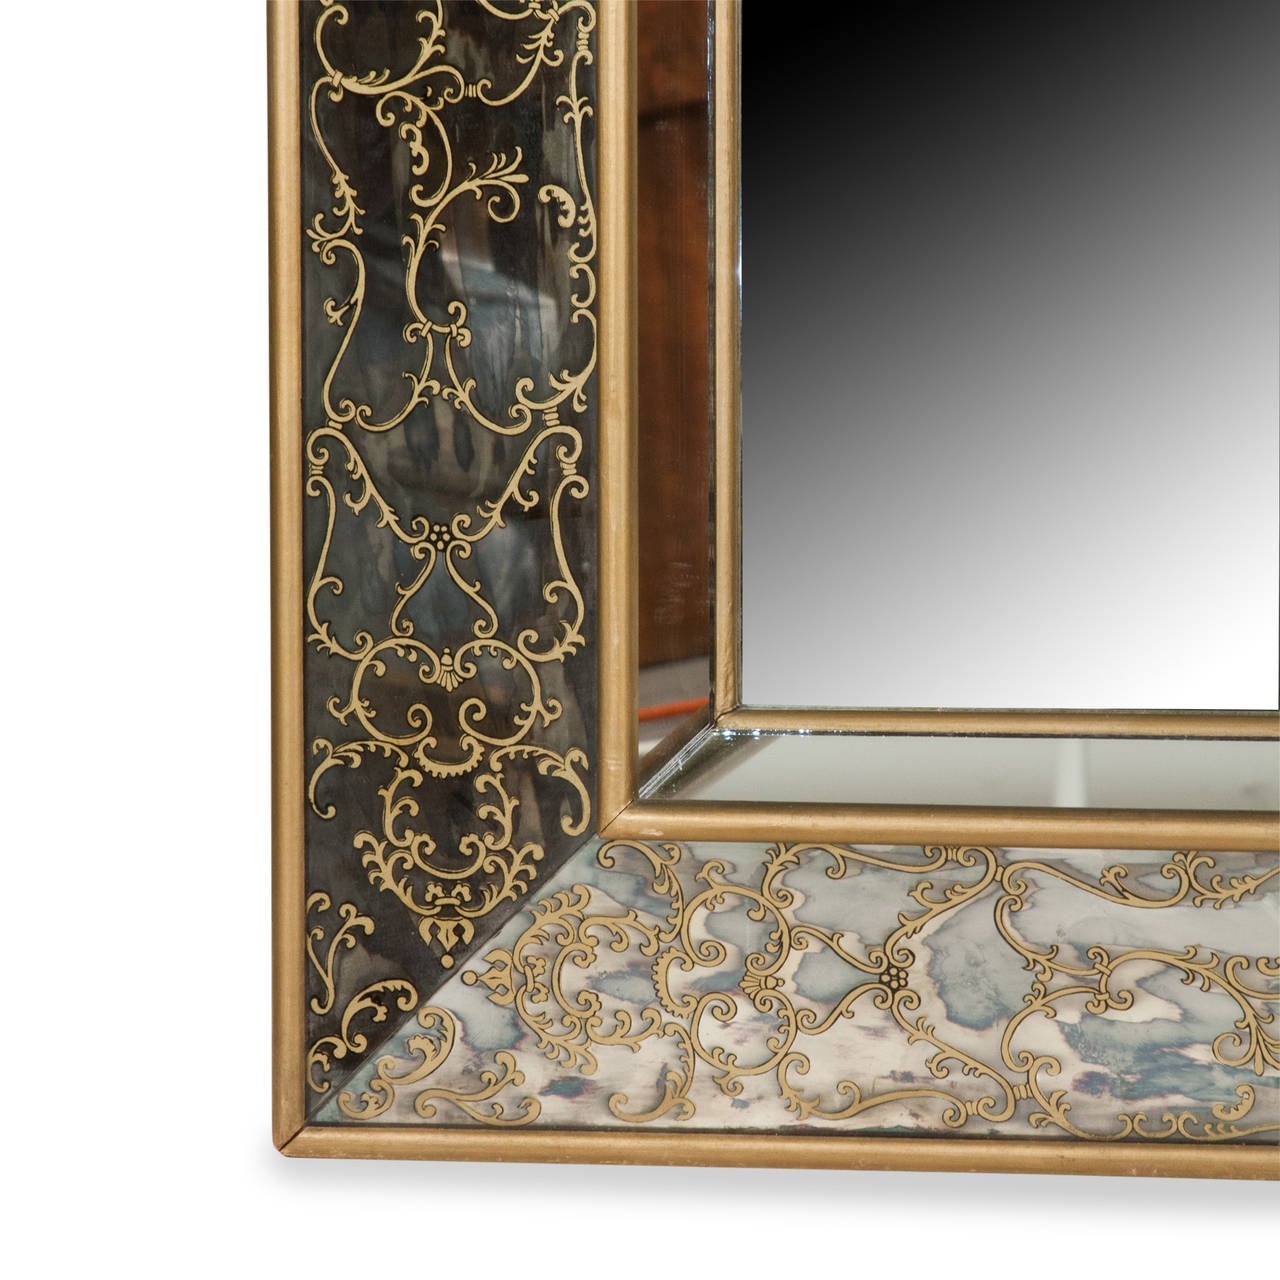 Large paneled wall mirror, of rectangular form. The central mirror surrounded by reverse painted mirror border, with giltwood frame and borders, American, 1960s. Measures: 60 in x 48 in, depth 3 in. width of outer panel 5 in. Interior mirror